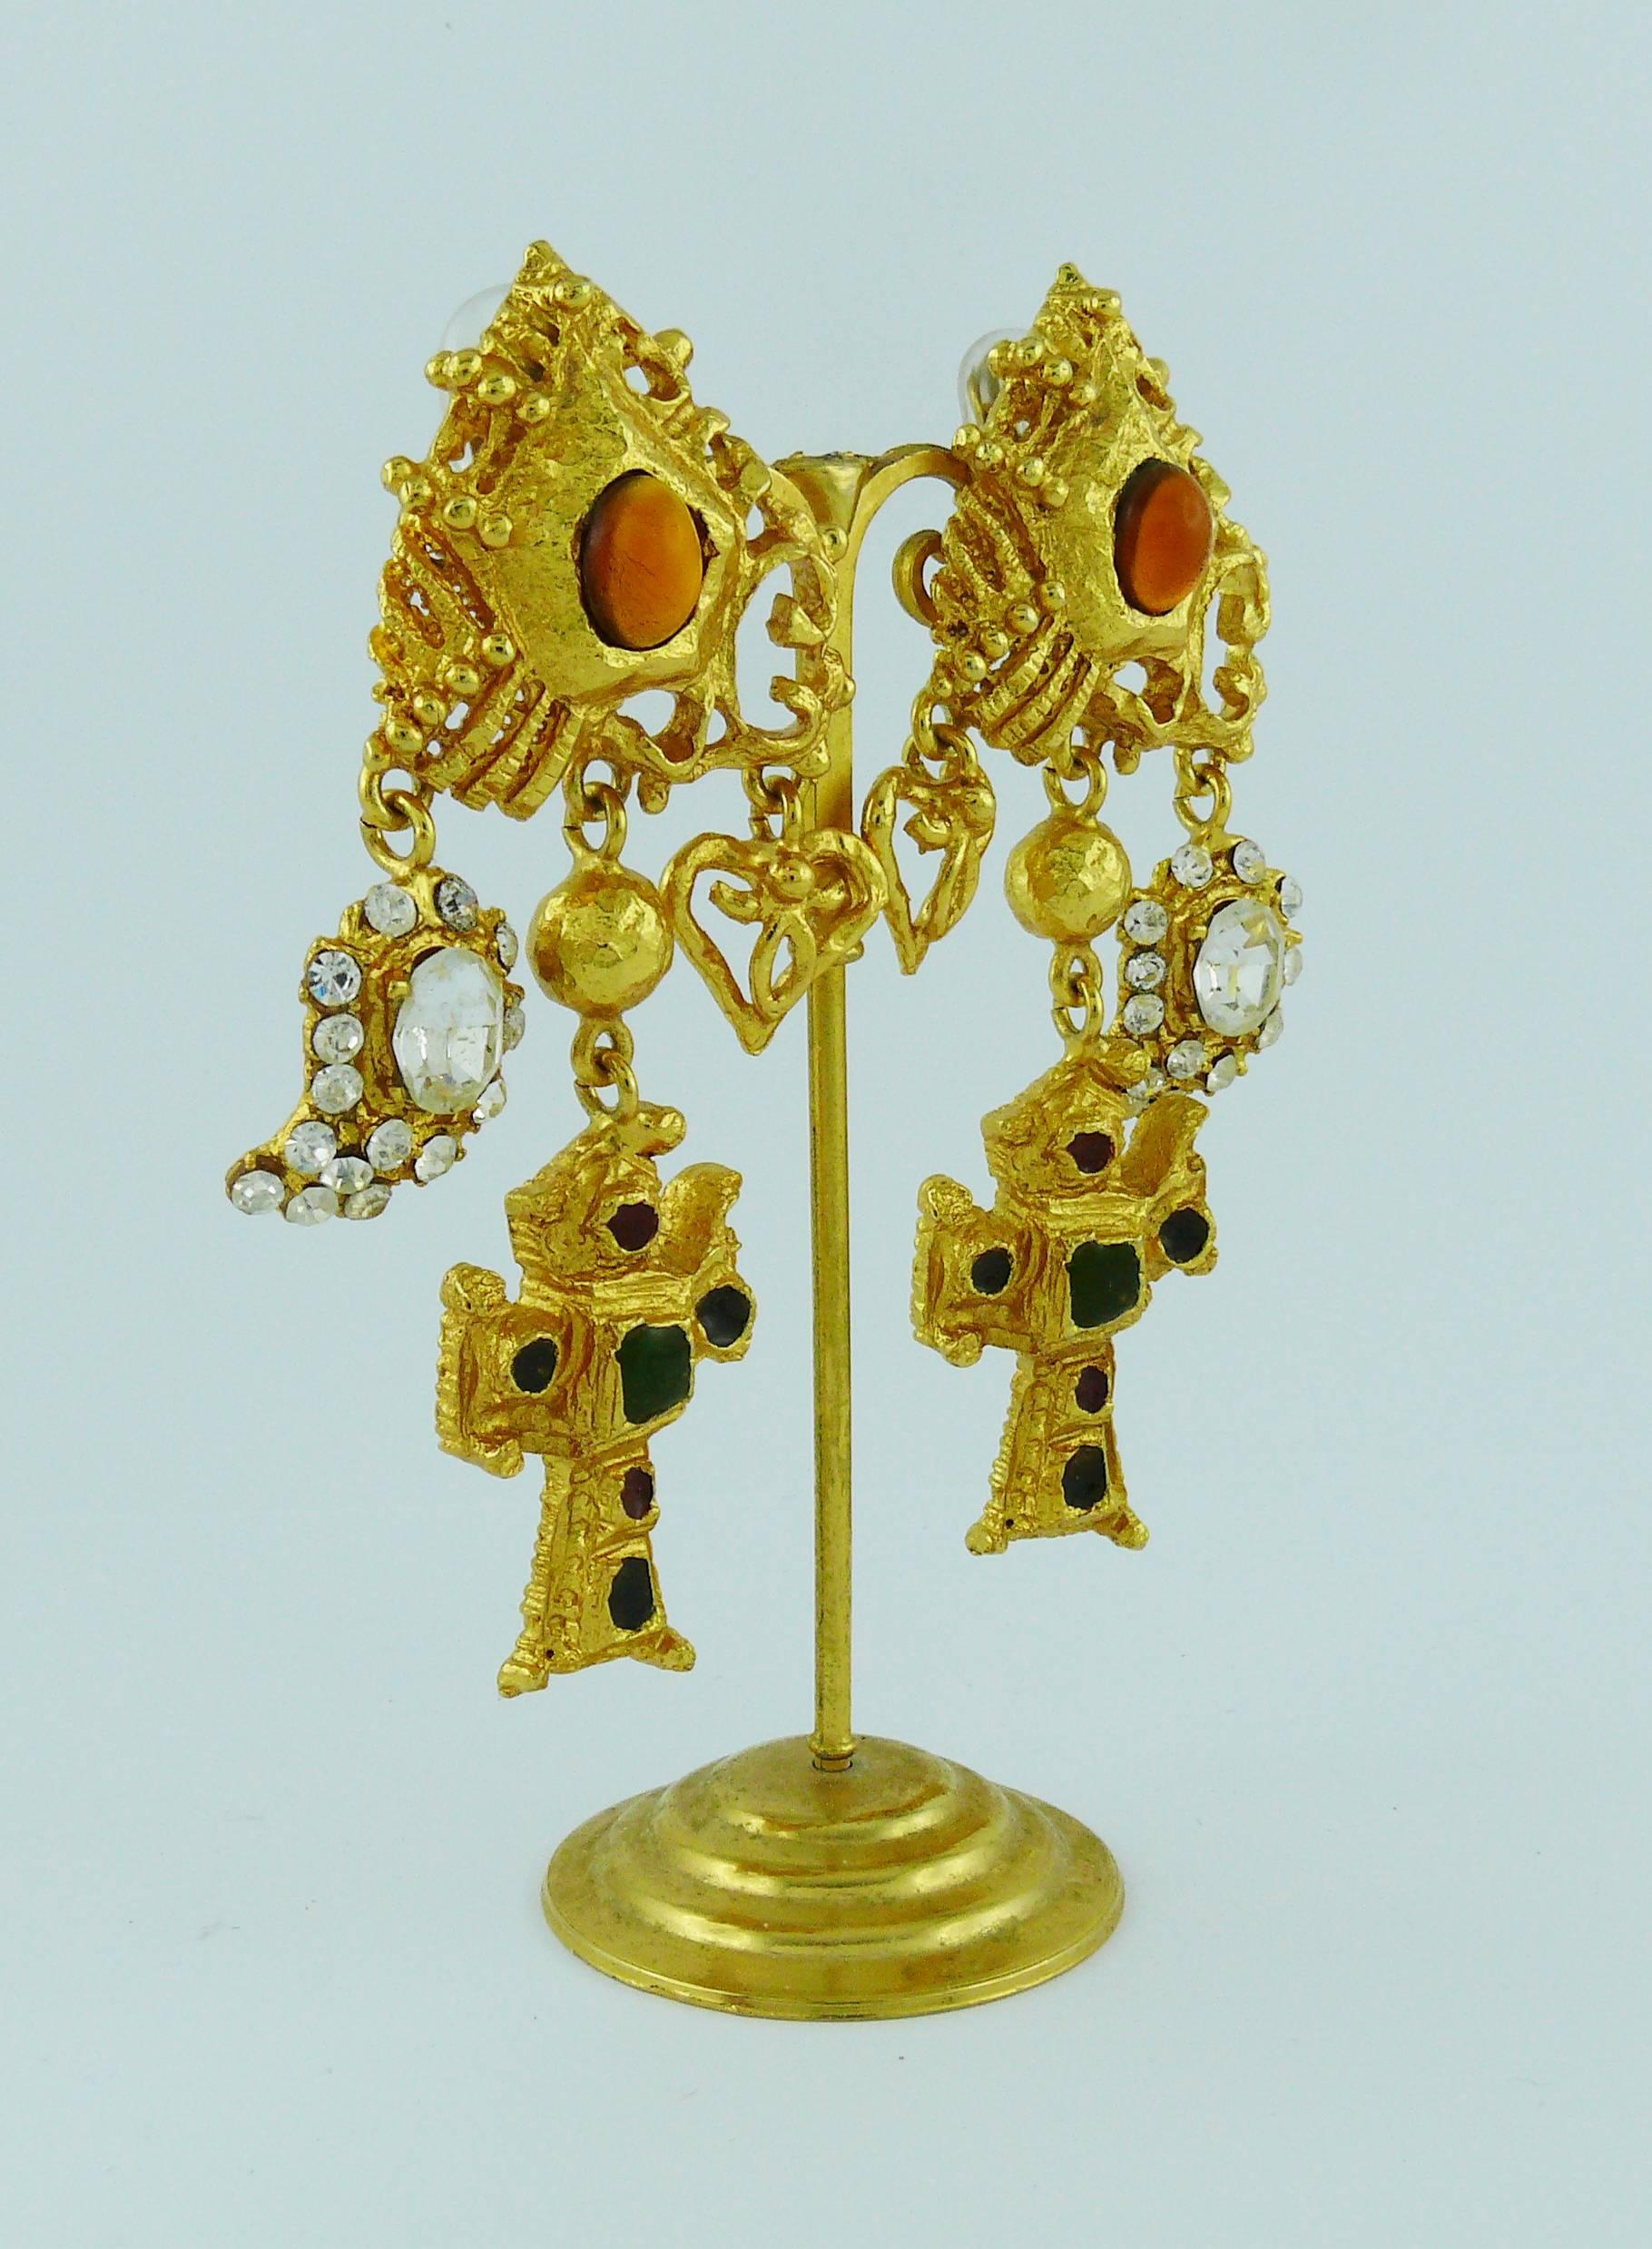 CHRISTIAN LACROIX vintage Baroque dangling earrings (clip-on) featuring a gold toned openwork textured design with various iconic charms : muticolor enamel cross, jewelled boteh, heart.

Marked CHRISTIAN LACROIX CL Made in France.

Indicative